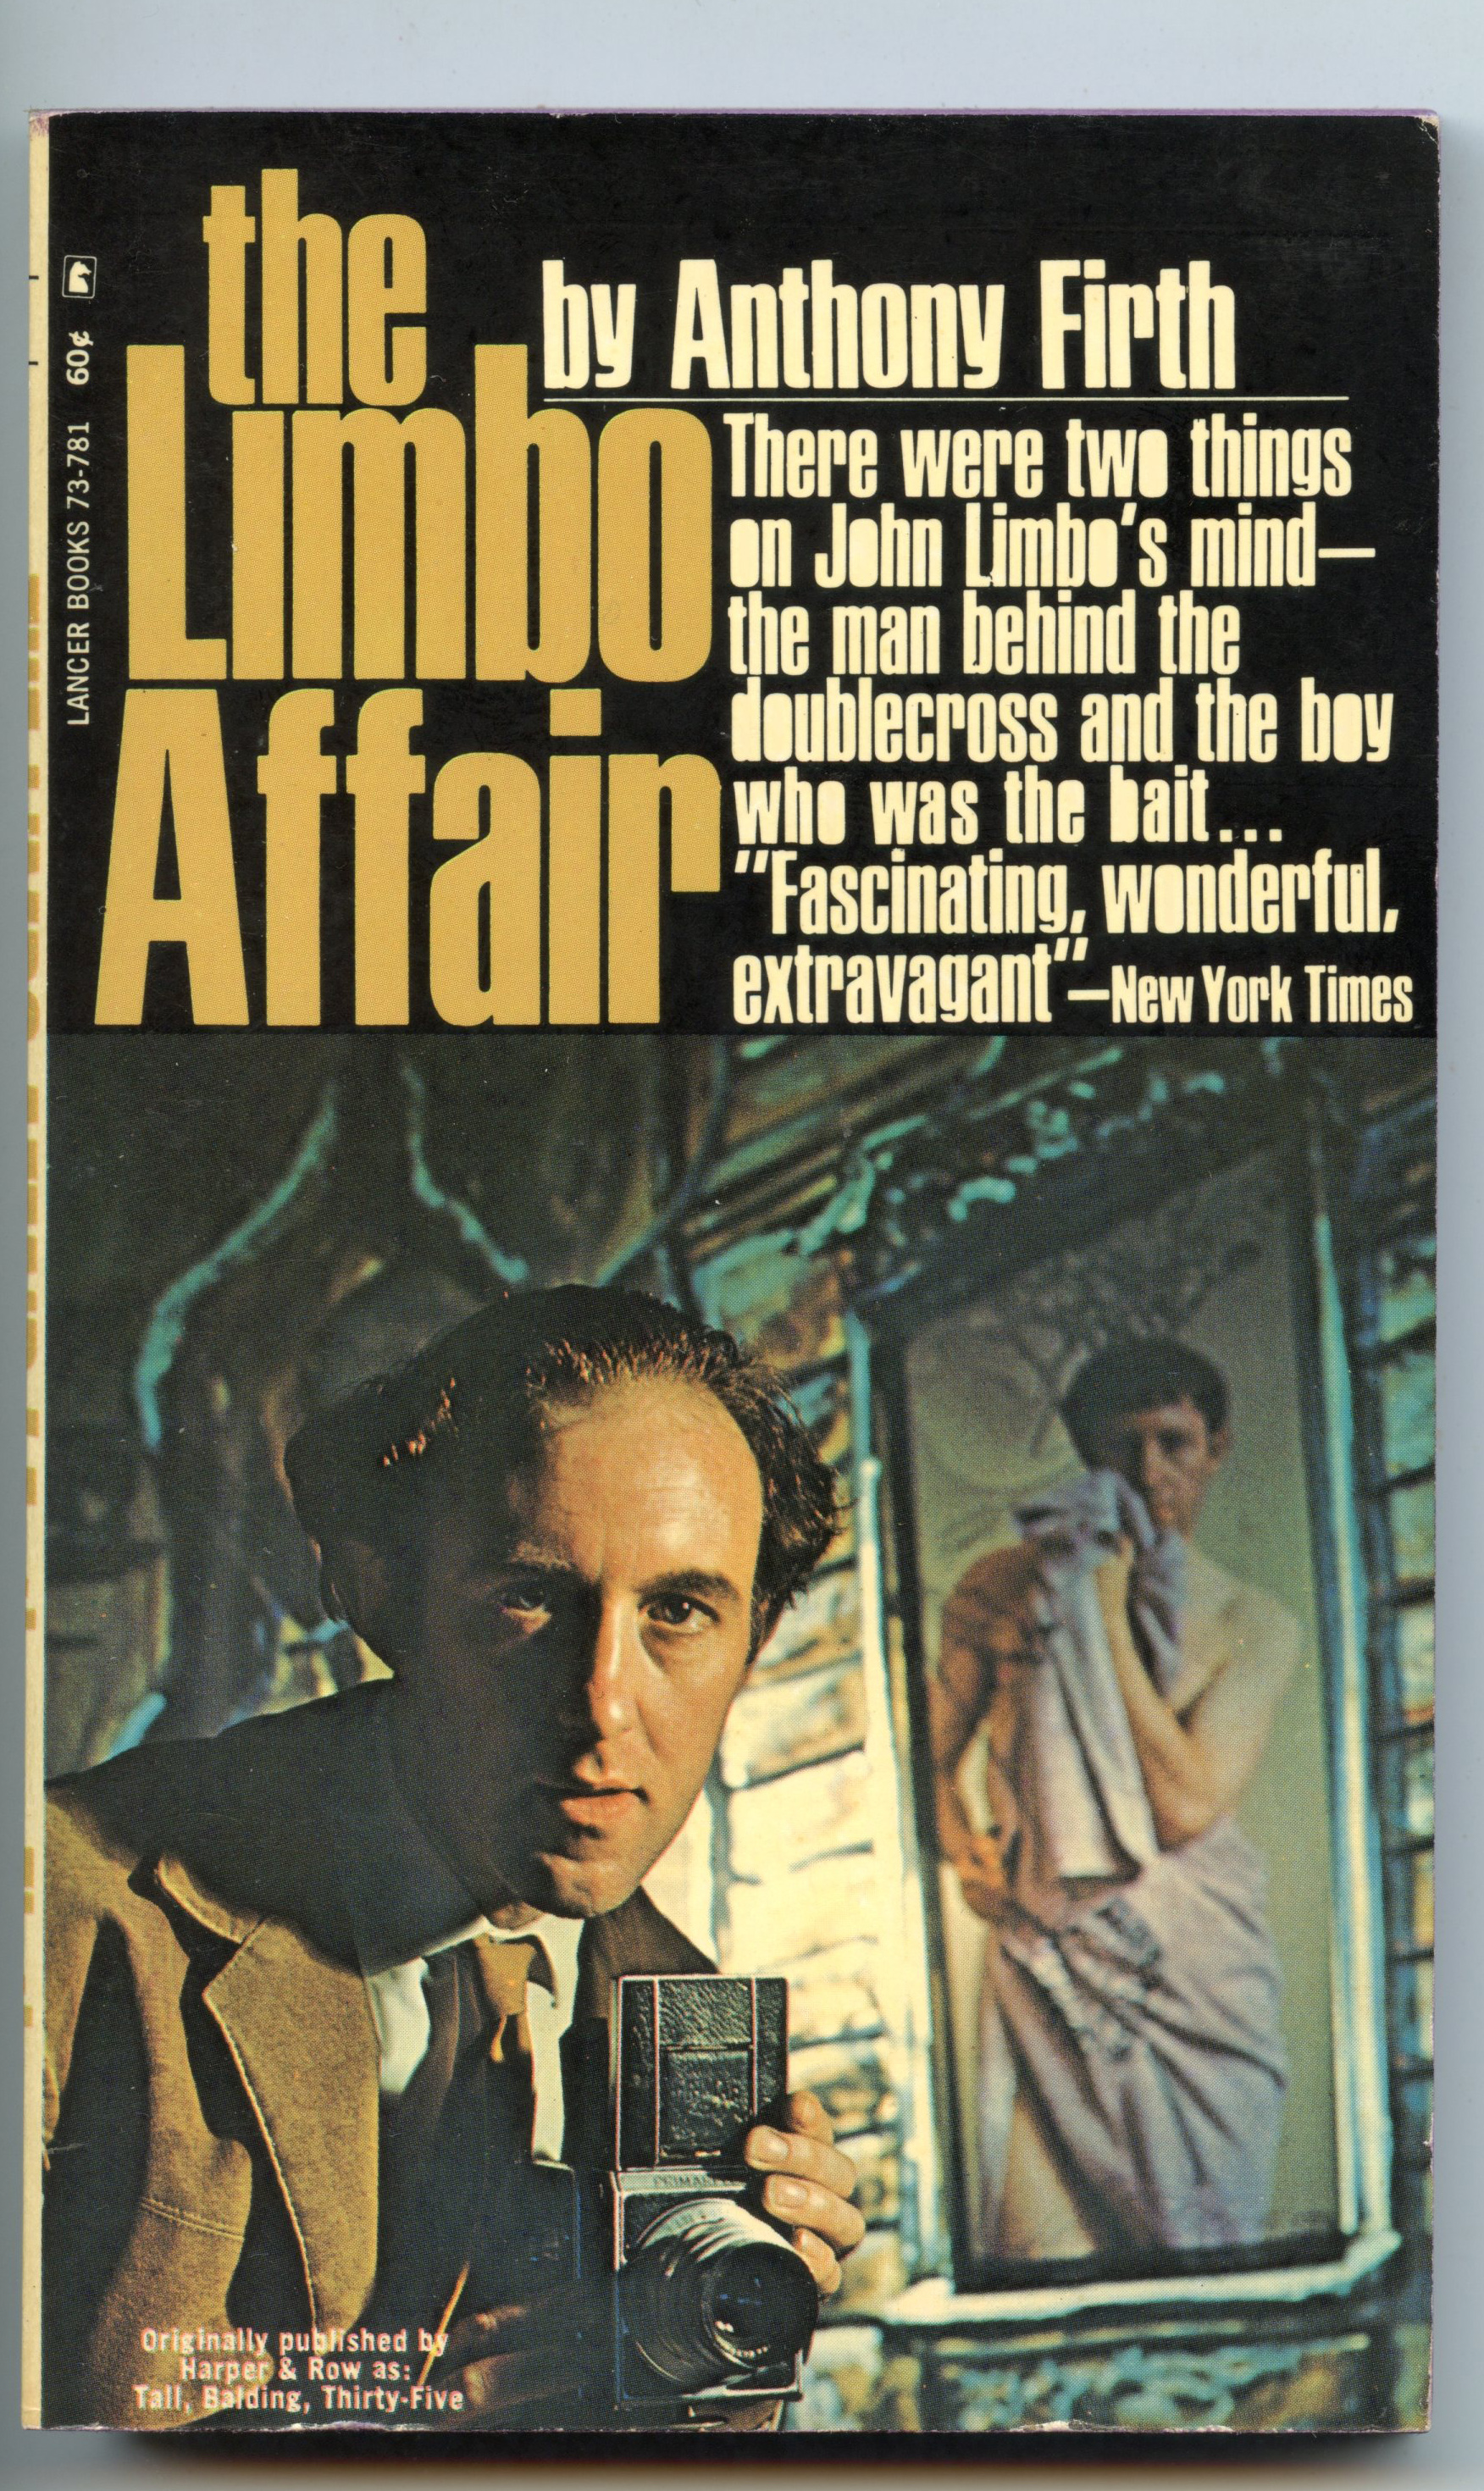 Image for The Limbo Affair  [Tall, Balding, Thirty-five]